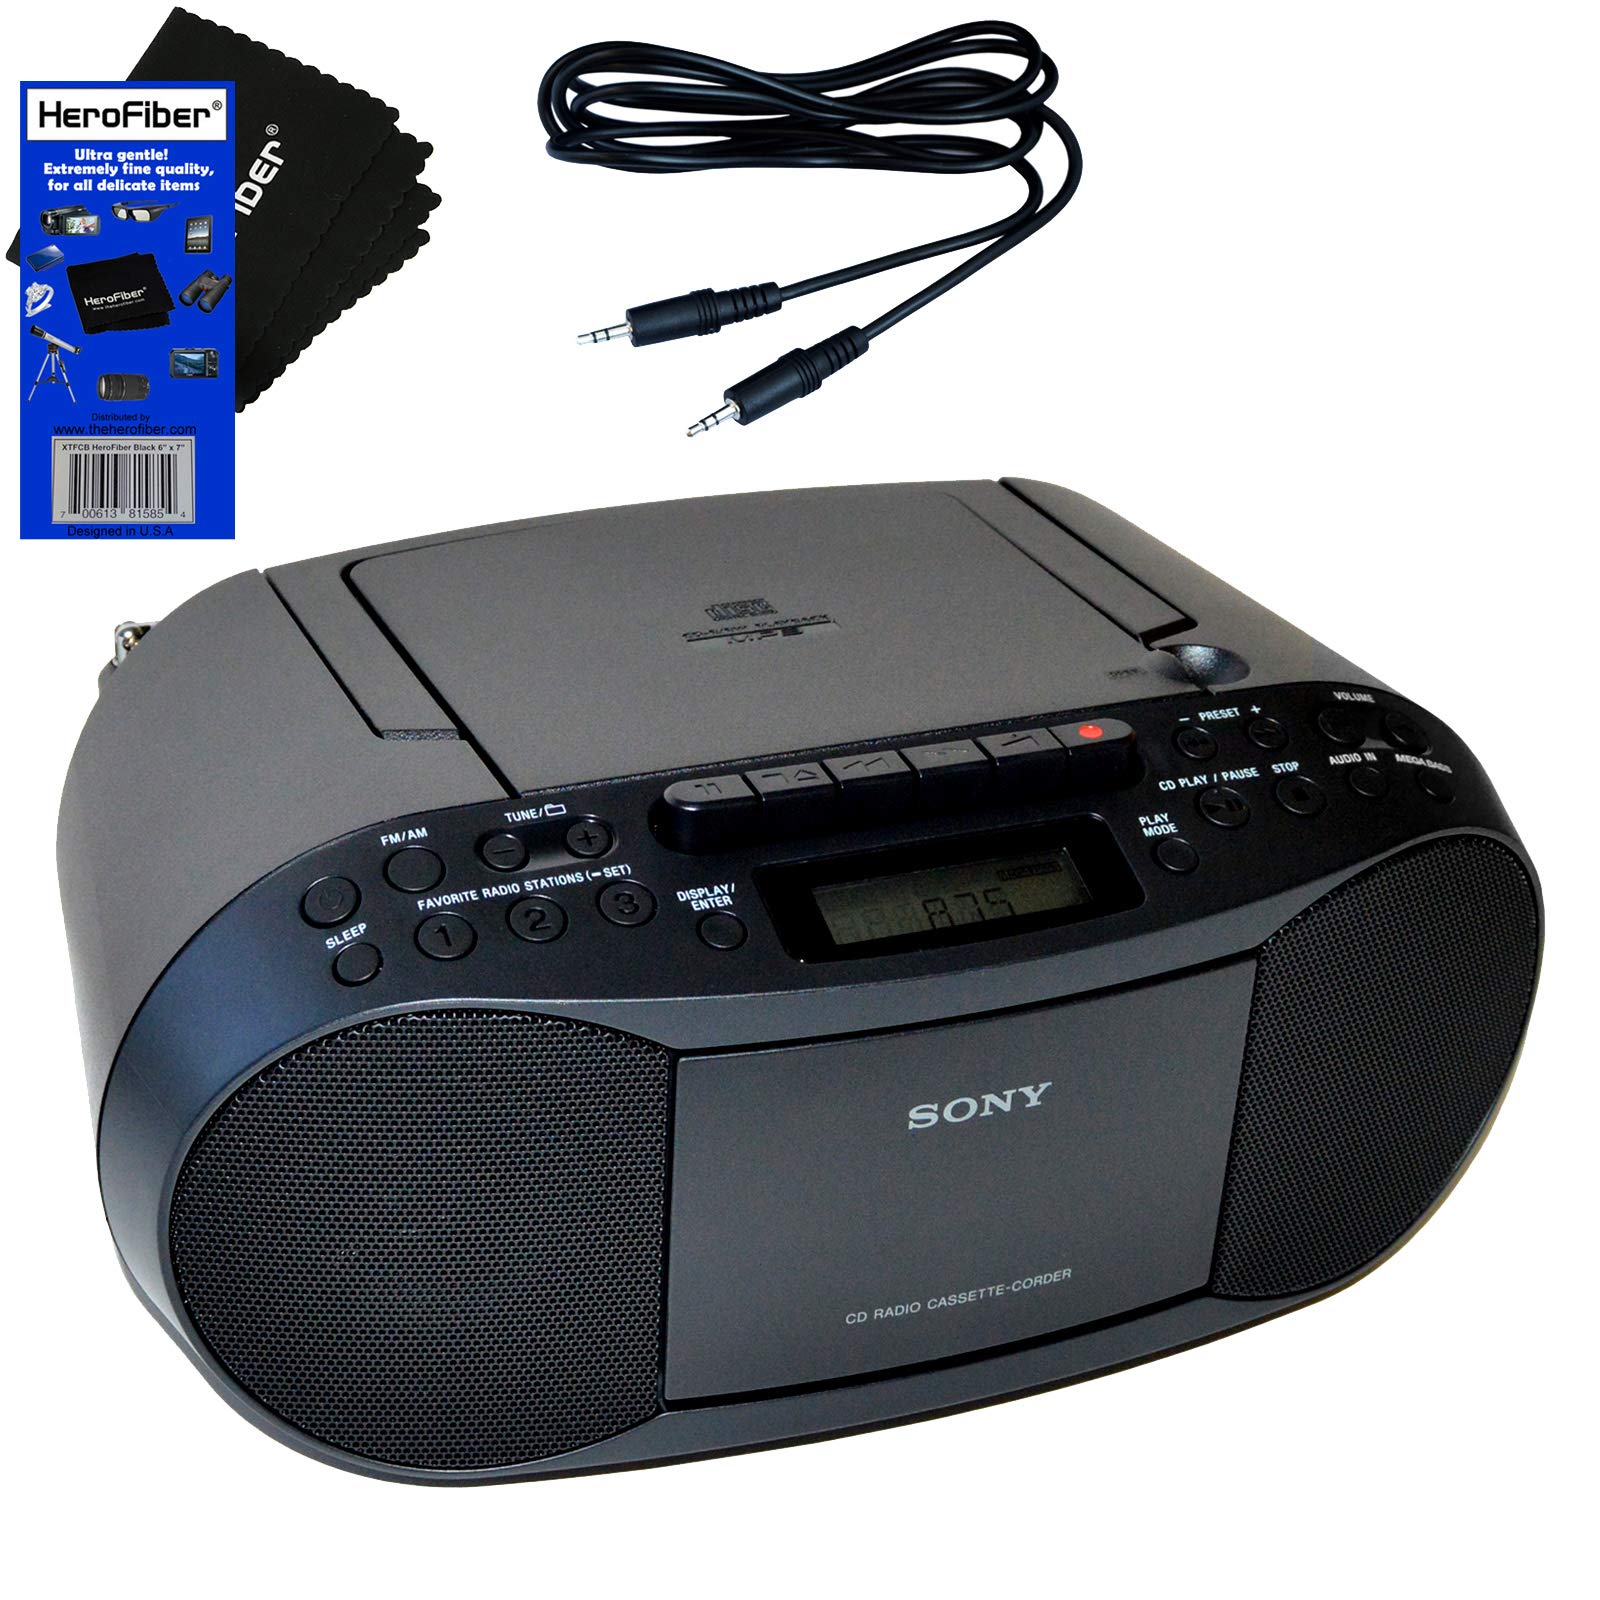 Mua Sony Compact Portable Stereo Sound System Boombox with MP3 CD Player,  Digital Tuner AM/FM Radio, Tape Cassette Recorder, Headphone Output &   Audio Auxiliary input Jack trên Amazon Mỹ chính hãng